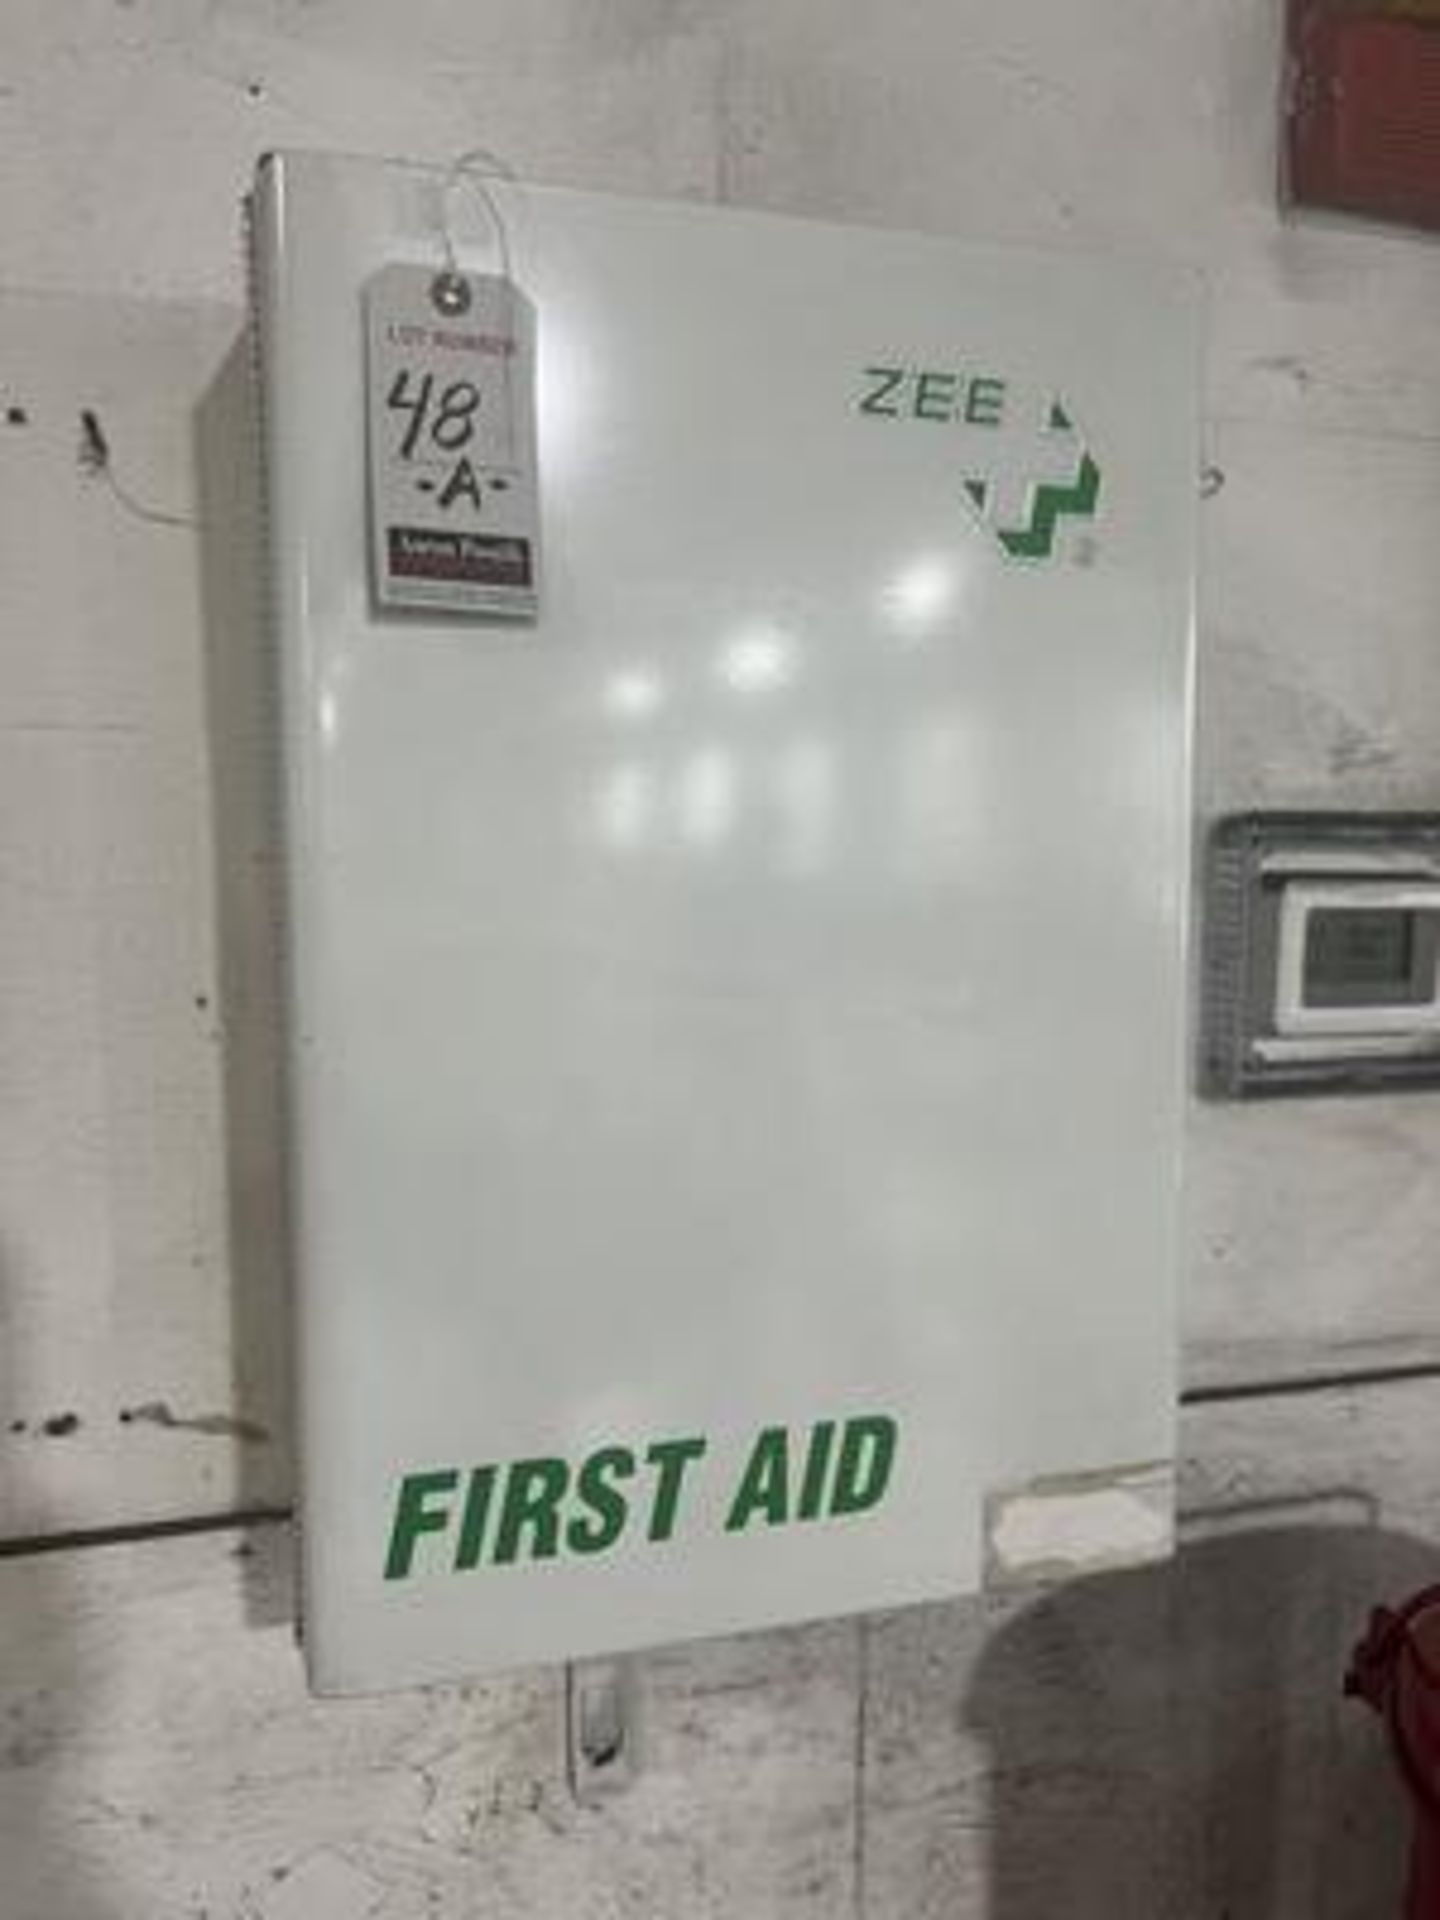 ZEE FIRST AID KIT